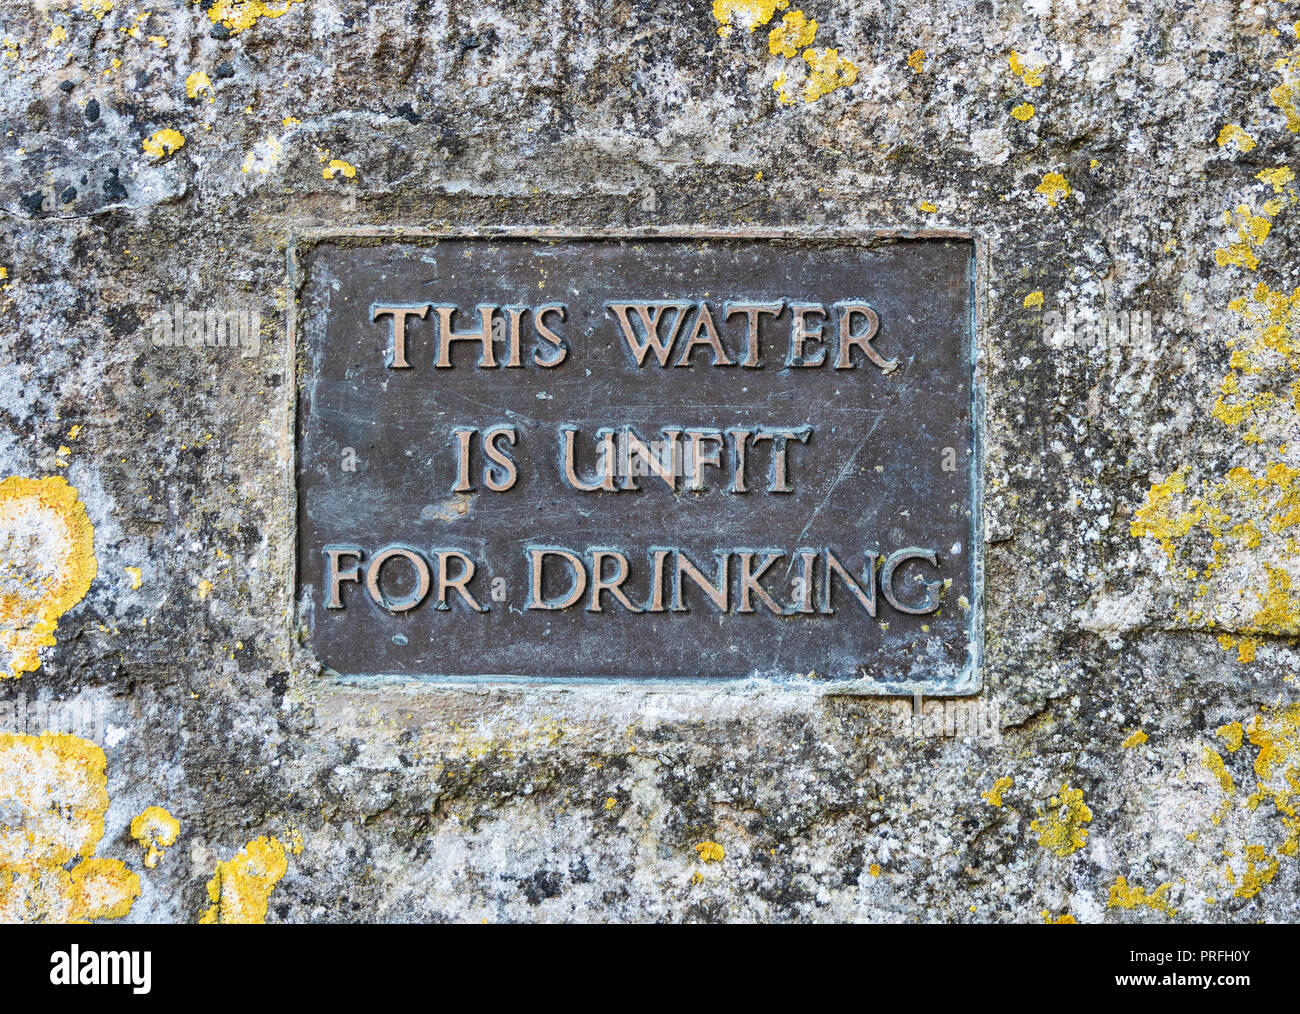 Unfit drinking water sign Stock Photo